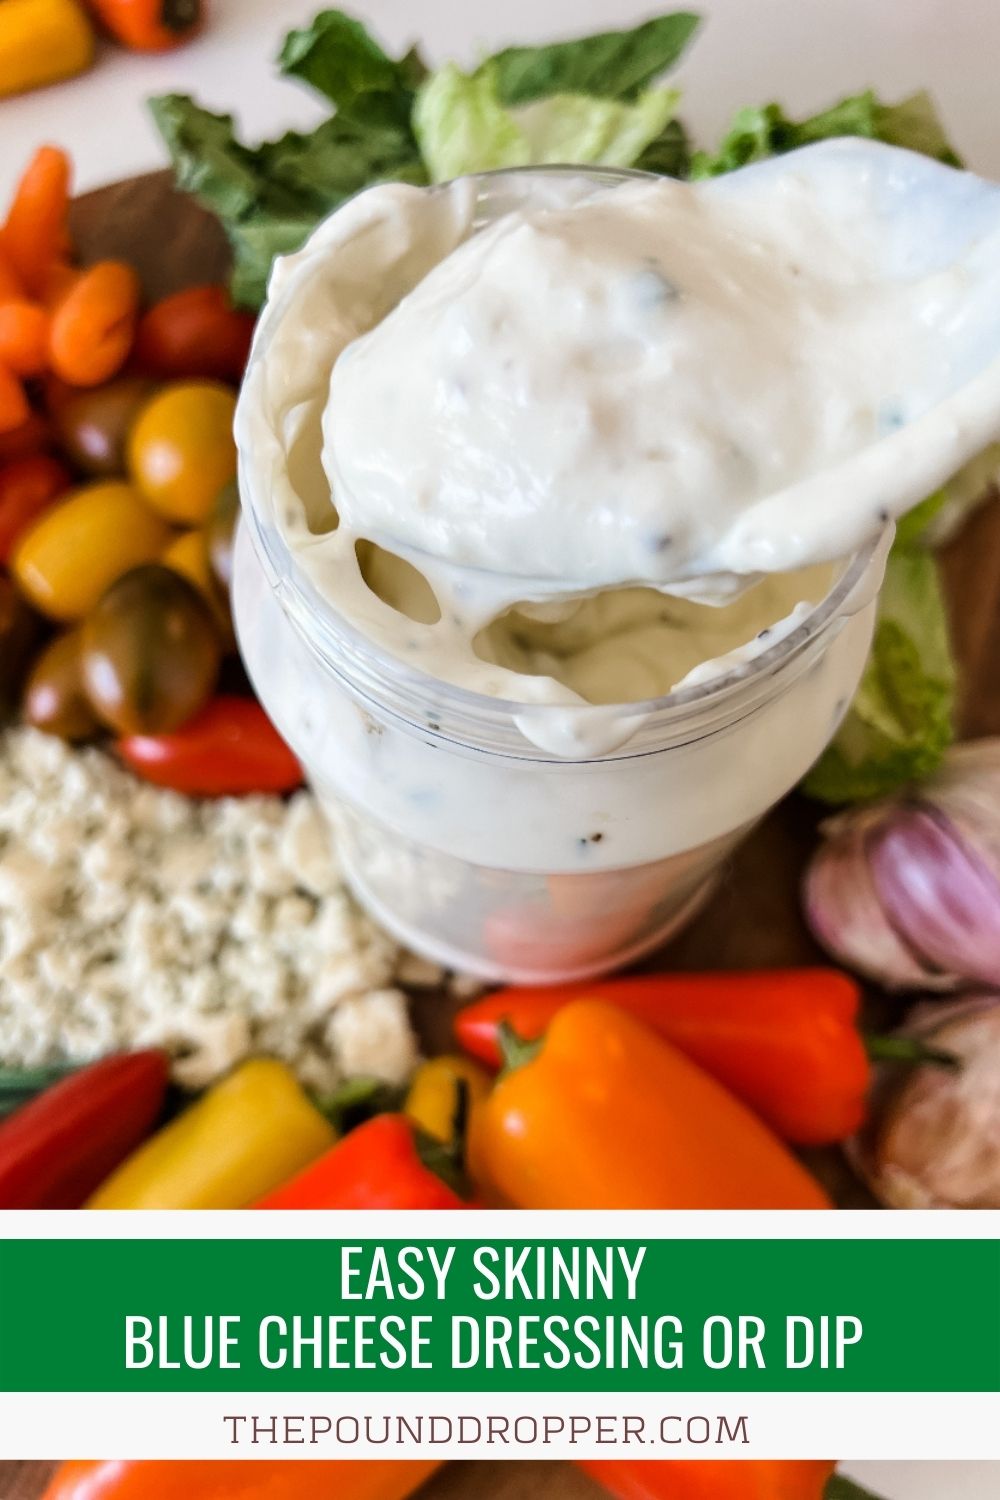 This Easy Skinny Blue Cheese Dressing or Dip has been lightened up using simple ingredients-keeping it light and healthy-without sacrificing the taste and flavor! via @pounddropper